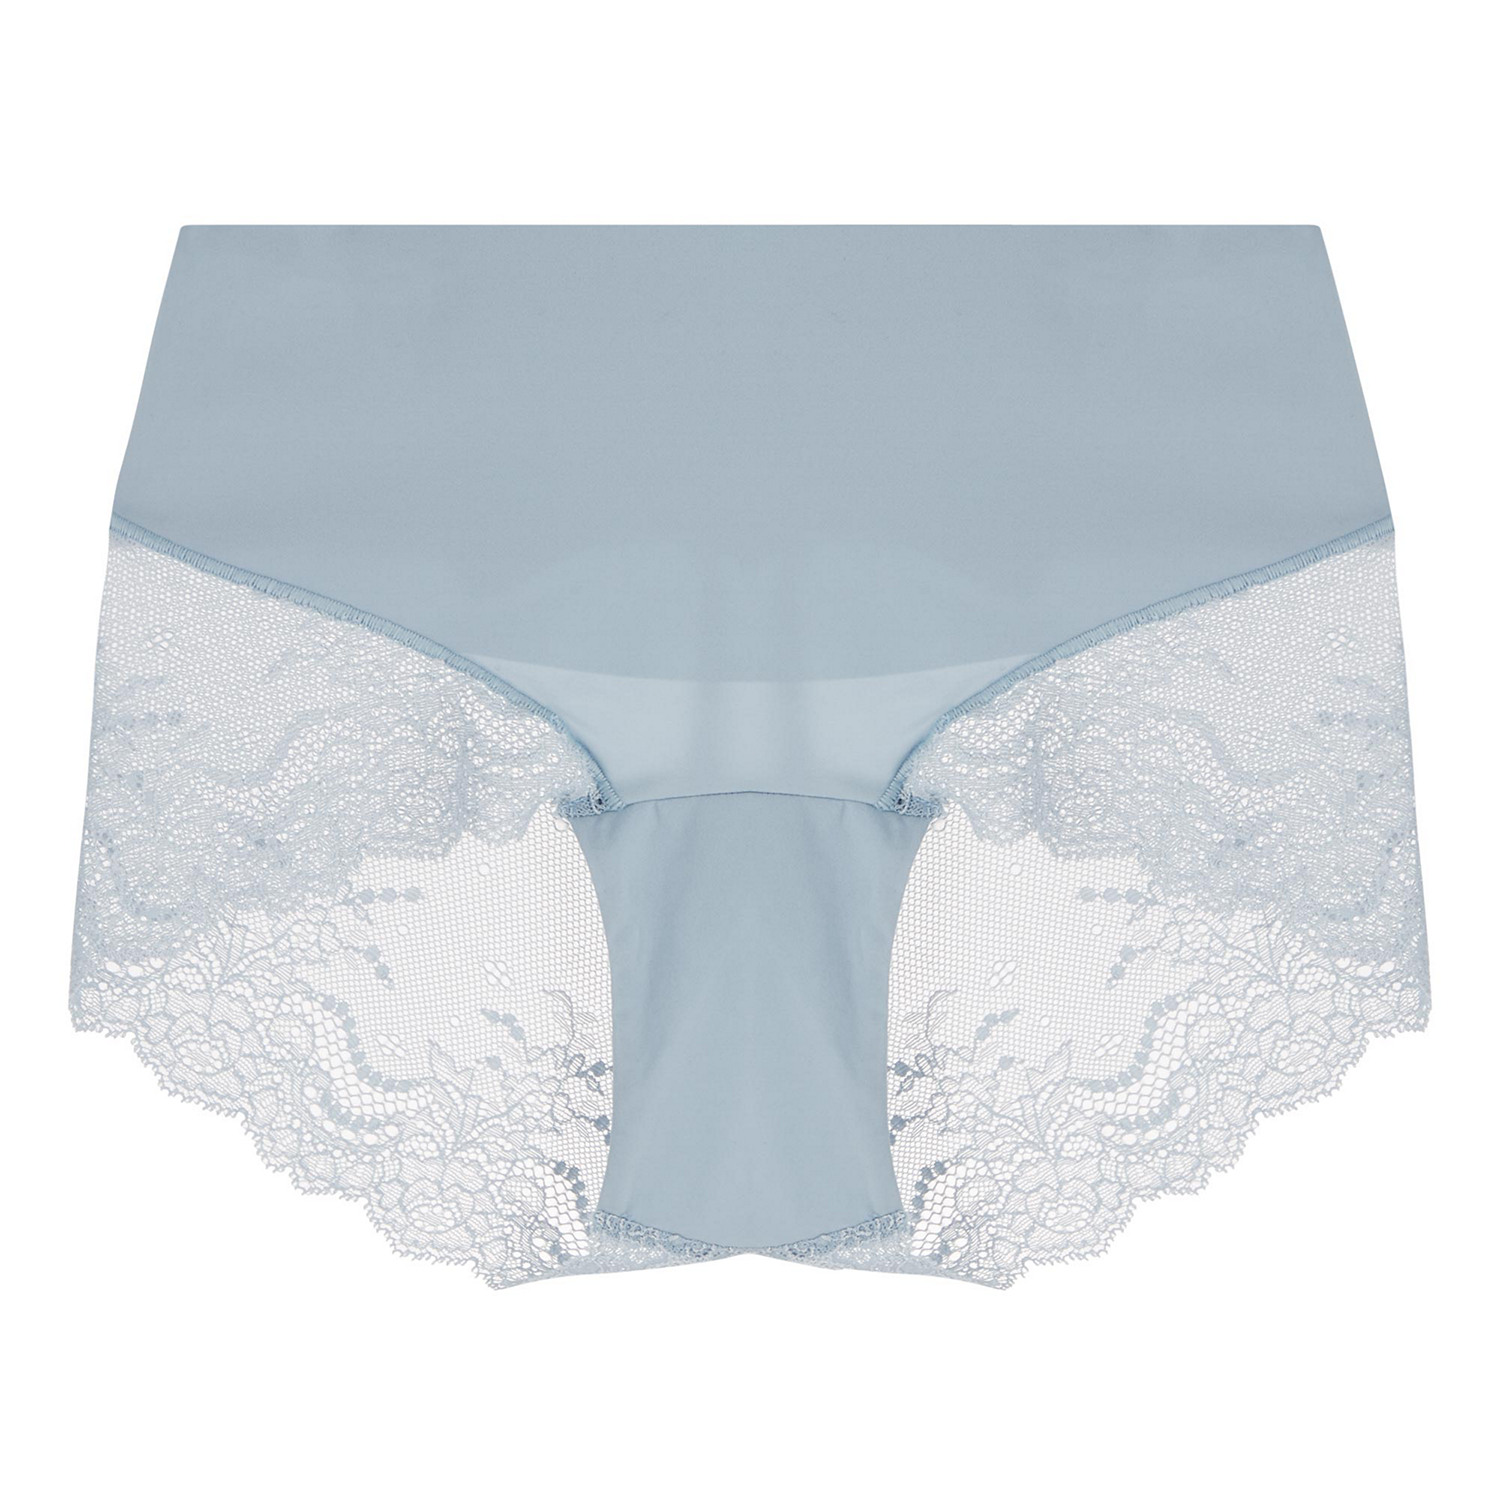 Undie-tectable® Lace Hi-Hipster Briefs